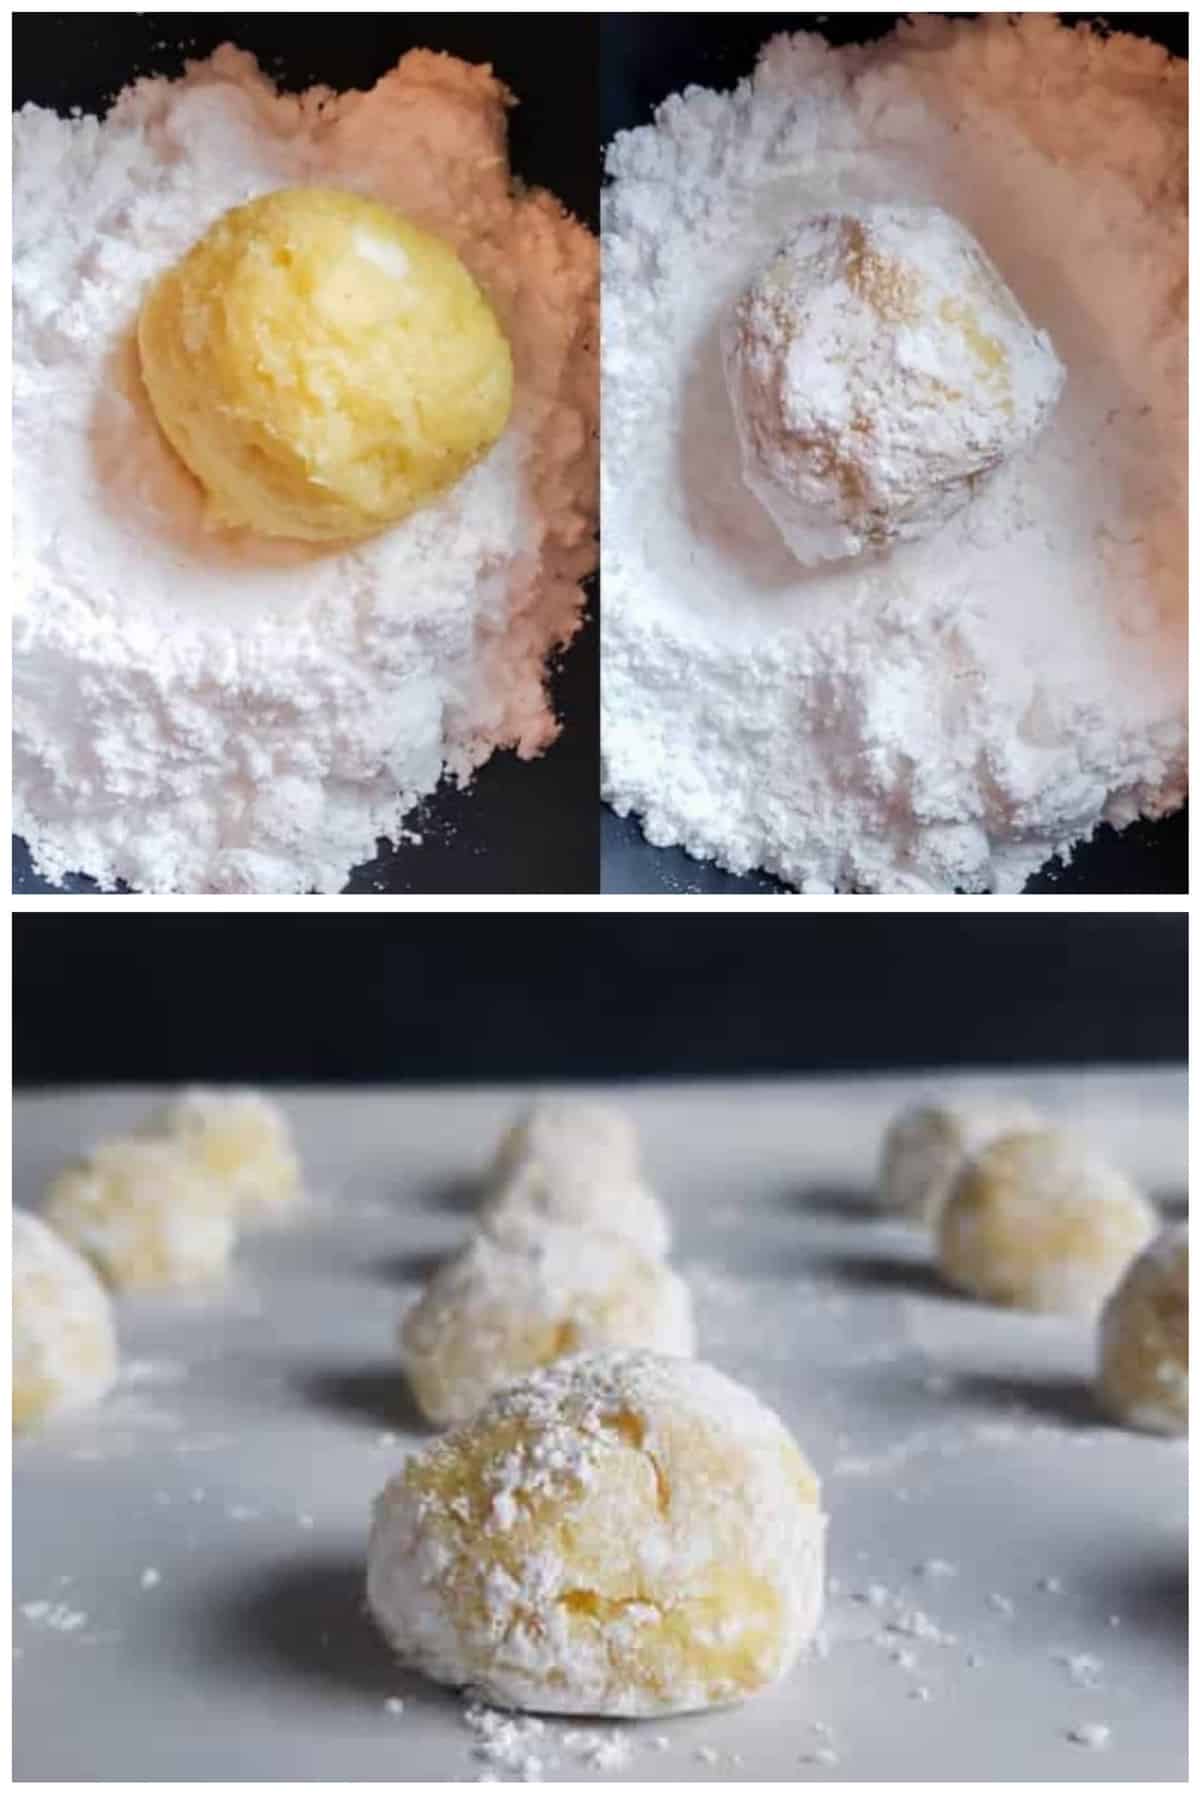 Prep image for cake cookies showing dough in powdered sugar and on a cookie sheet before baking.